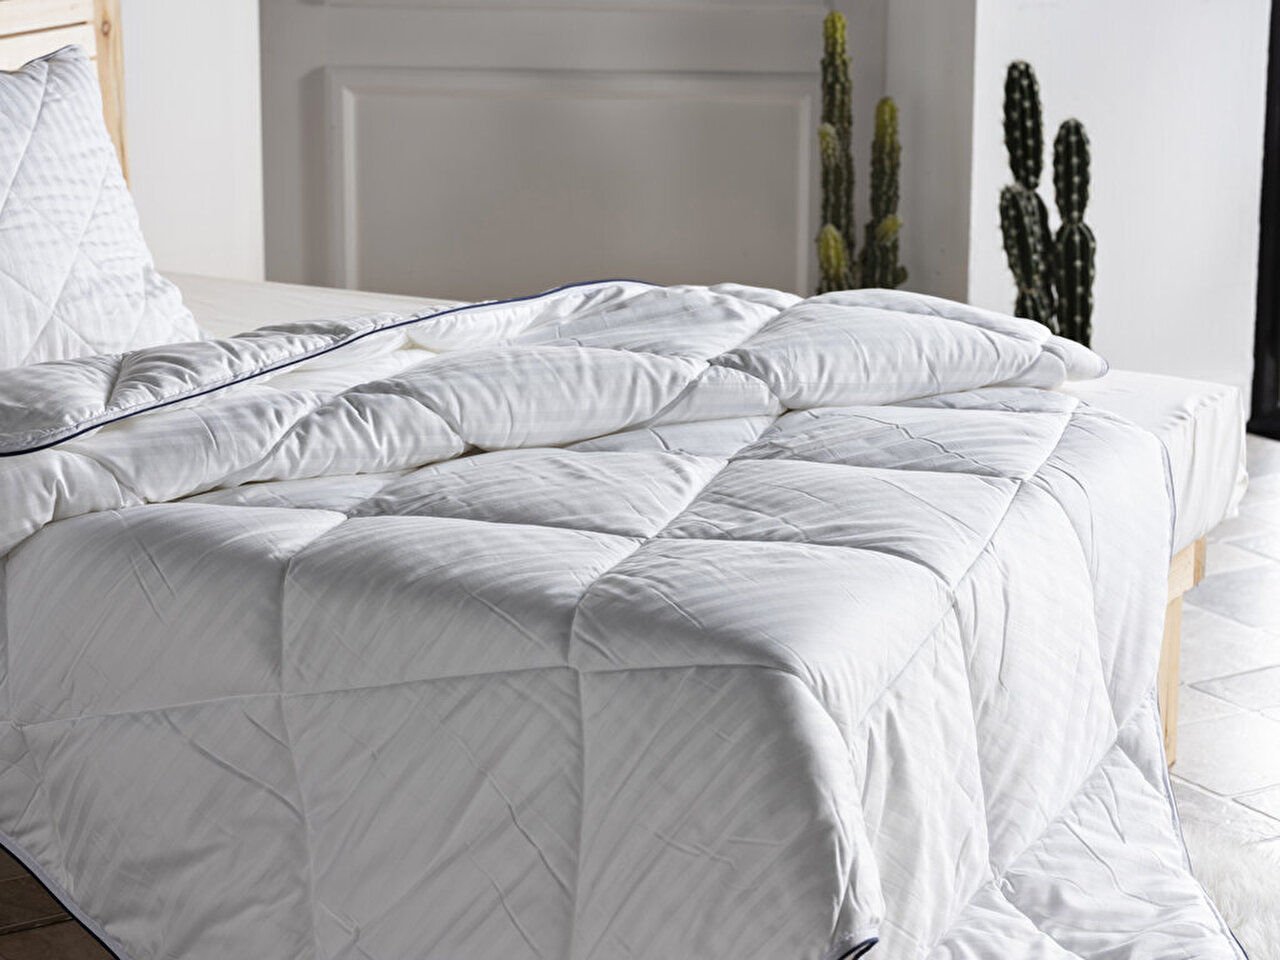  White Prestige Quilt - Luxurious Comfort for King Size Bed